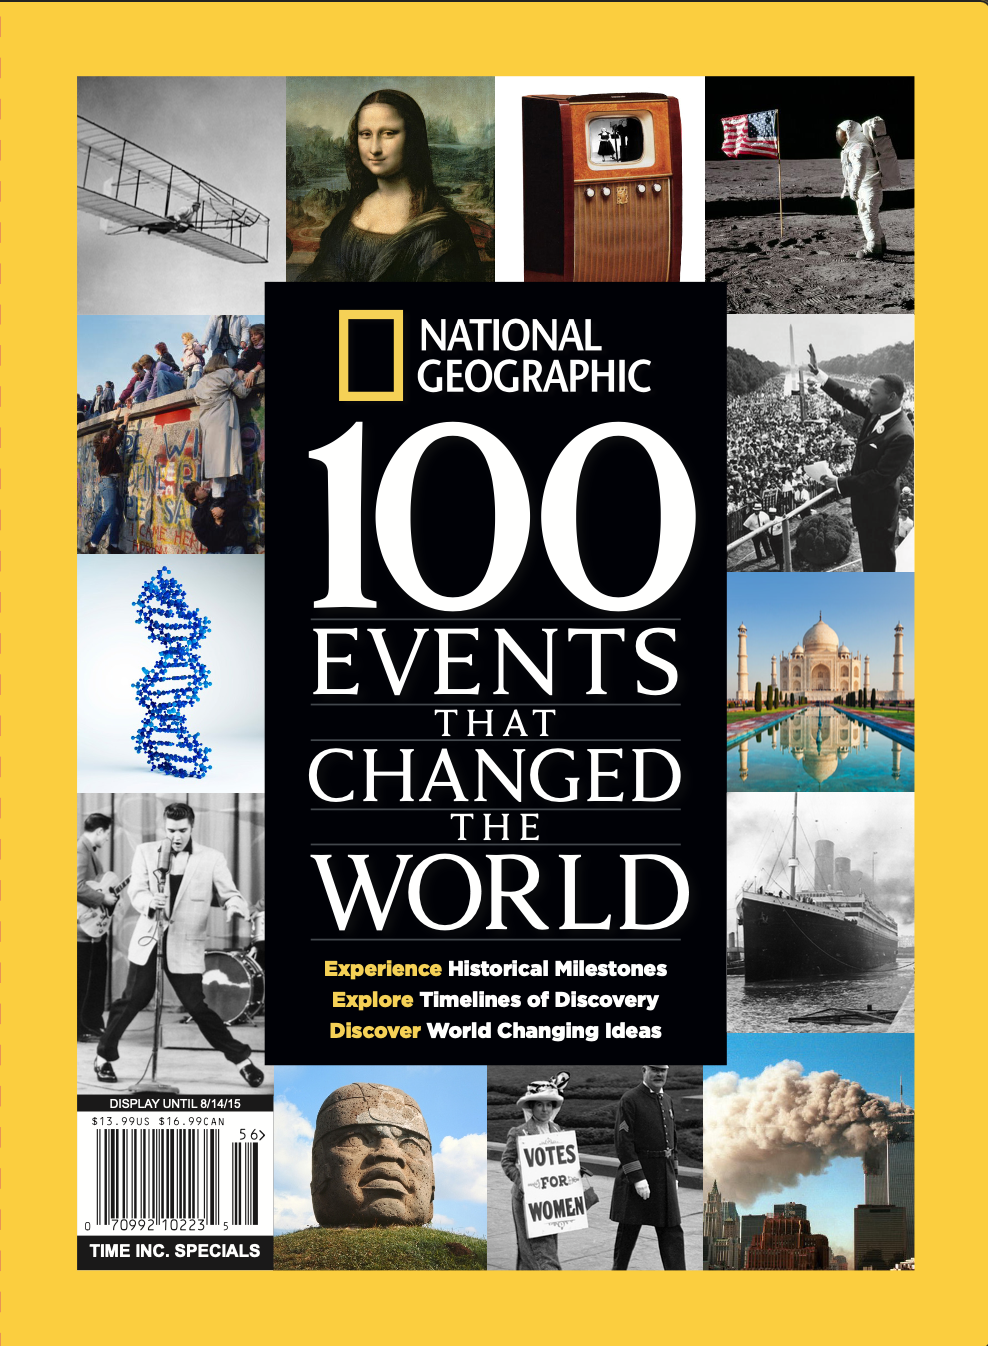 Image from NAT GEO SPECIAL EDITION COVERS